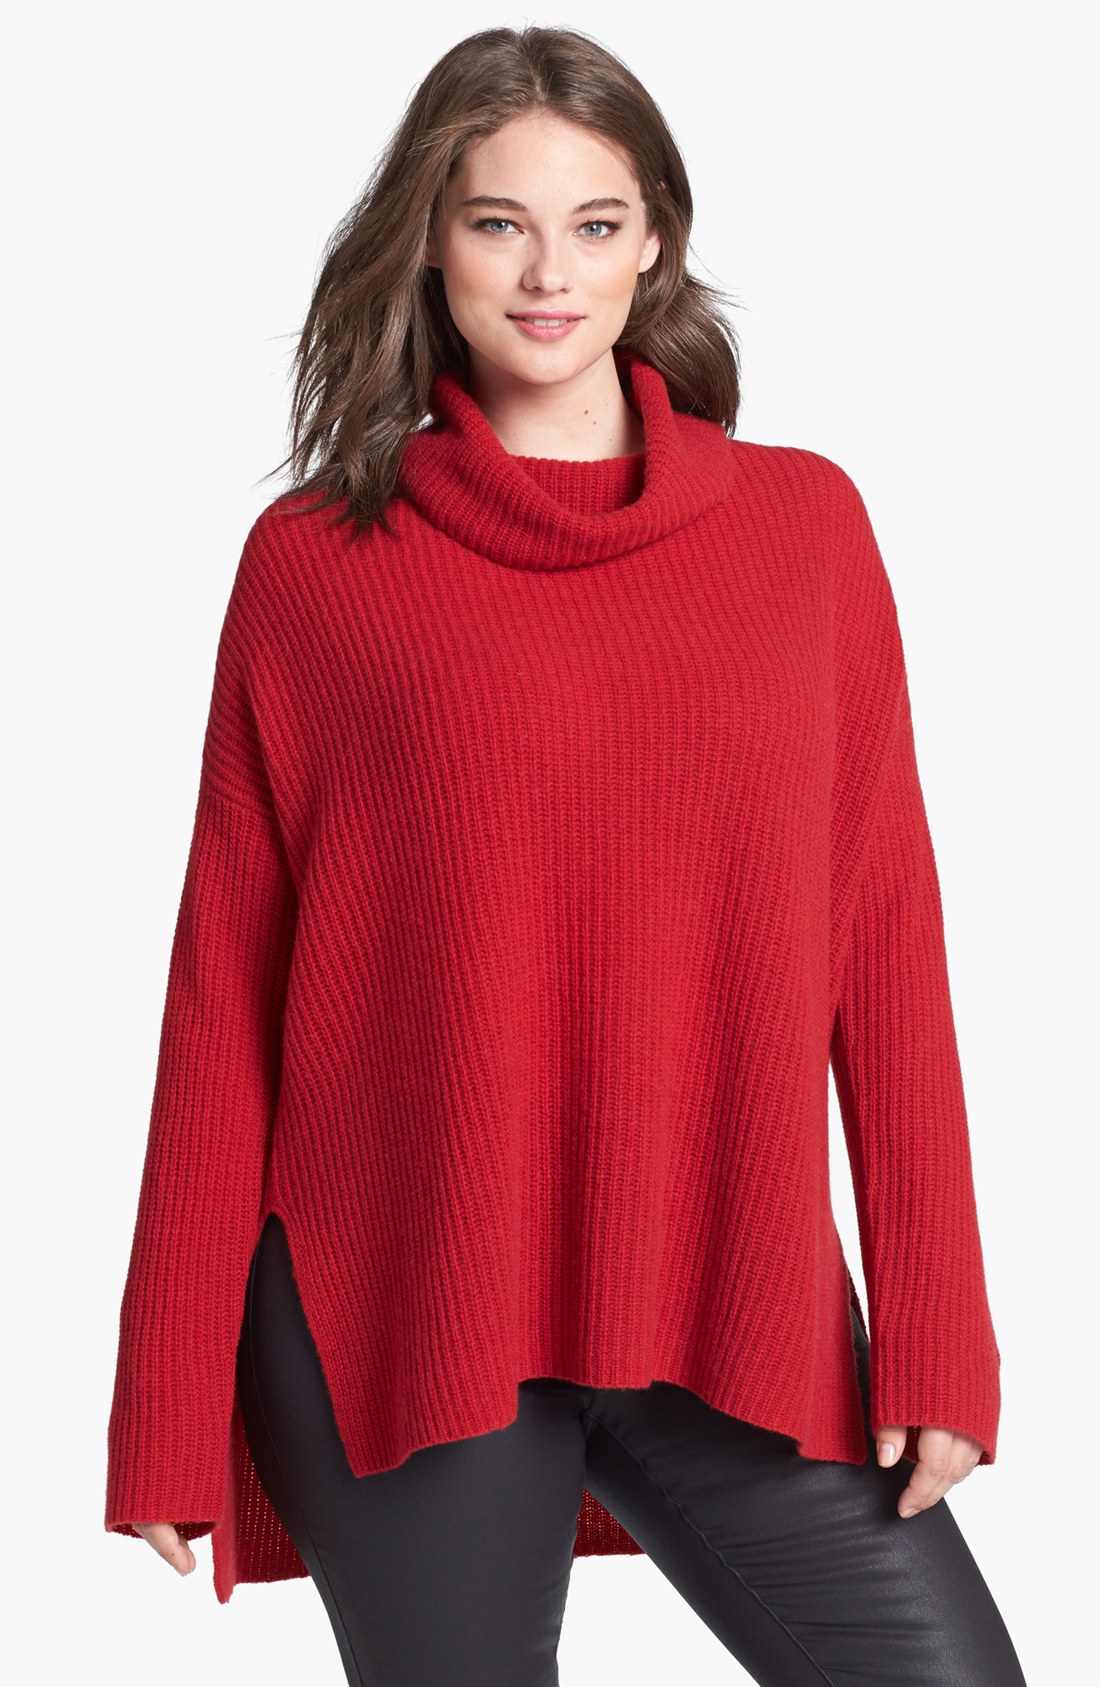 Eileen Fisher Yak Merino Turtleneck Poncho Sweater in Red (Lacquer) | Lyst